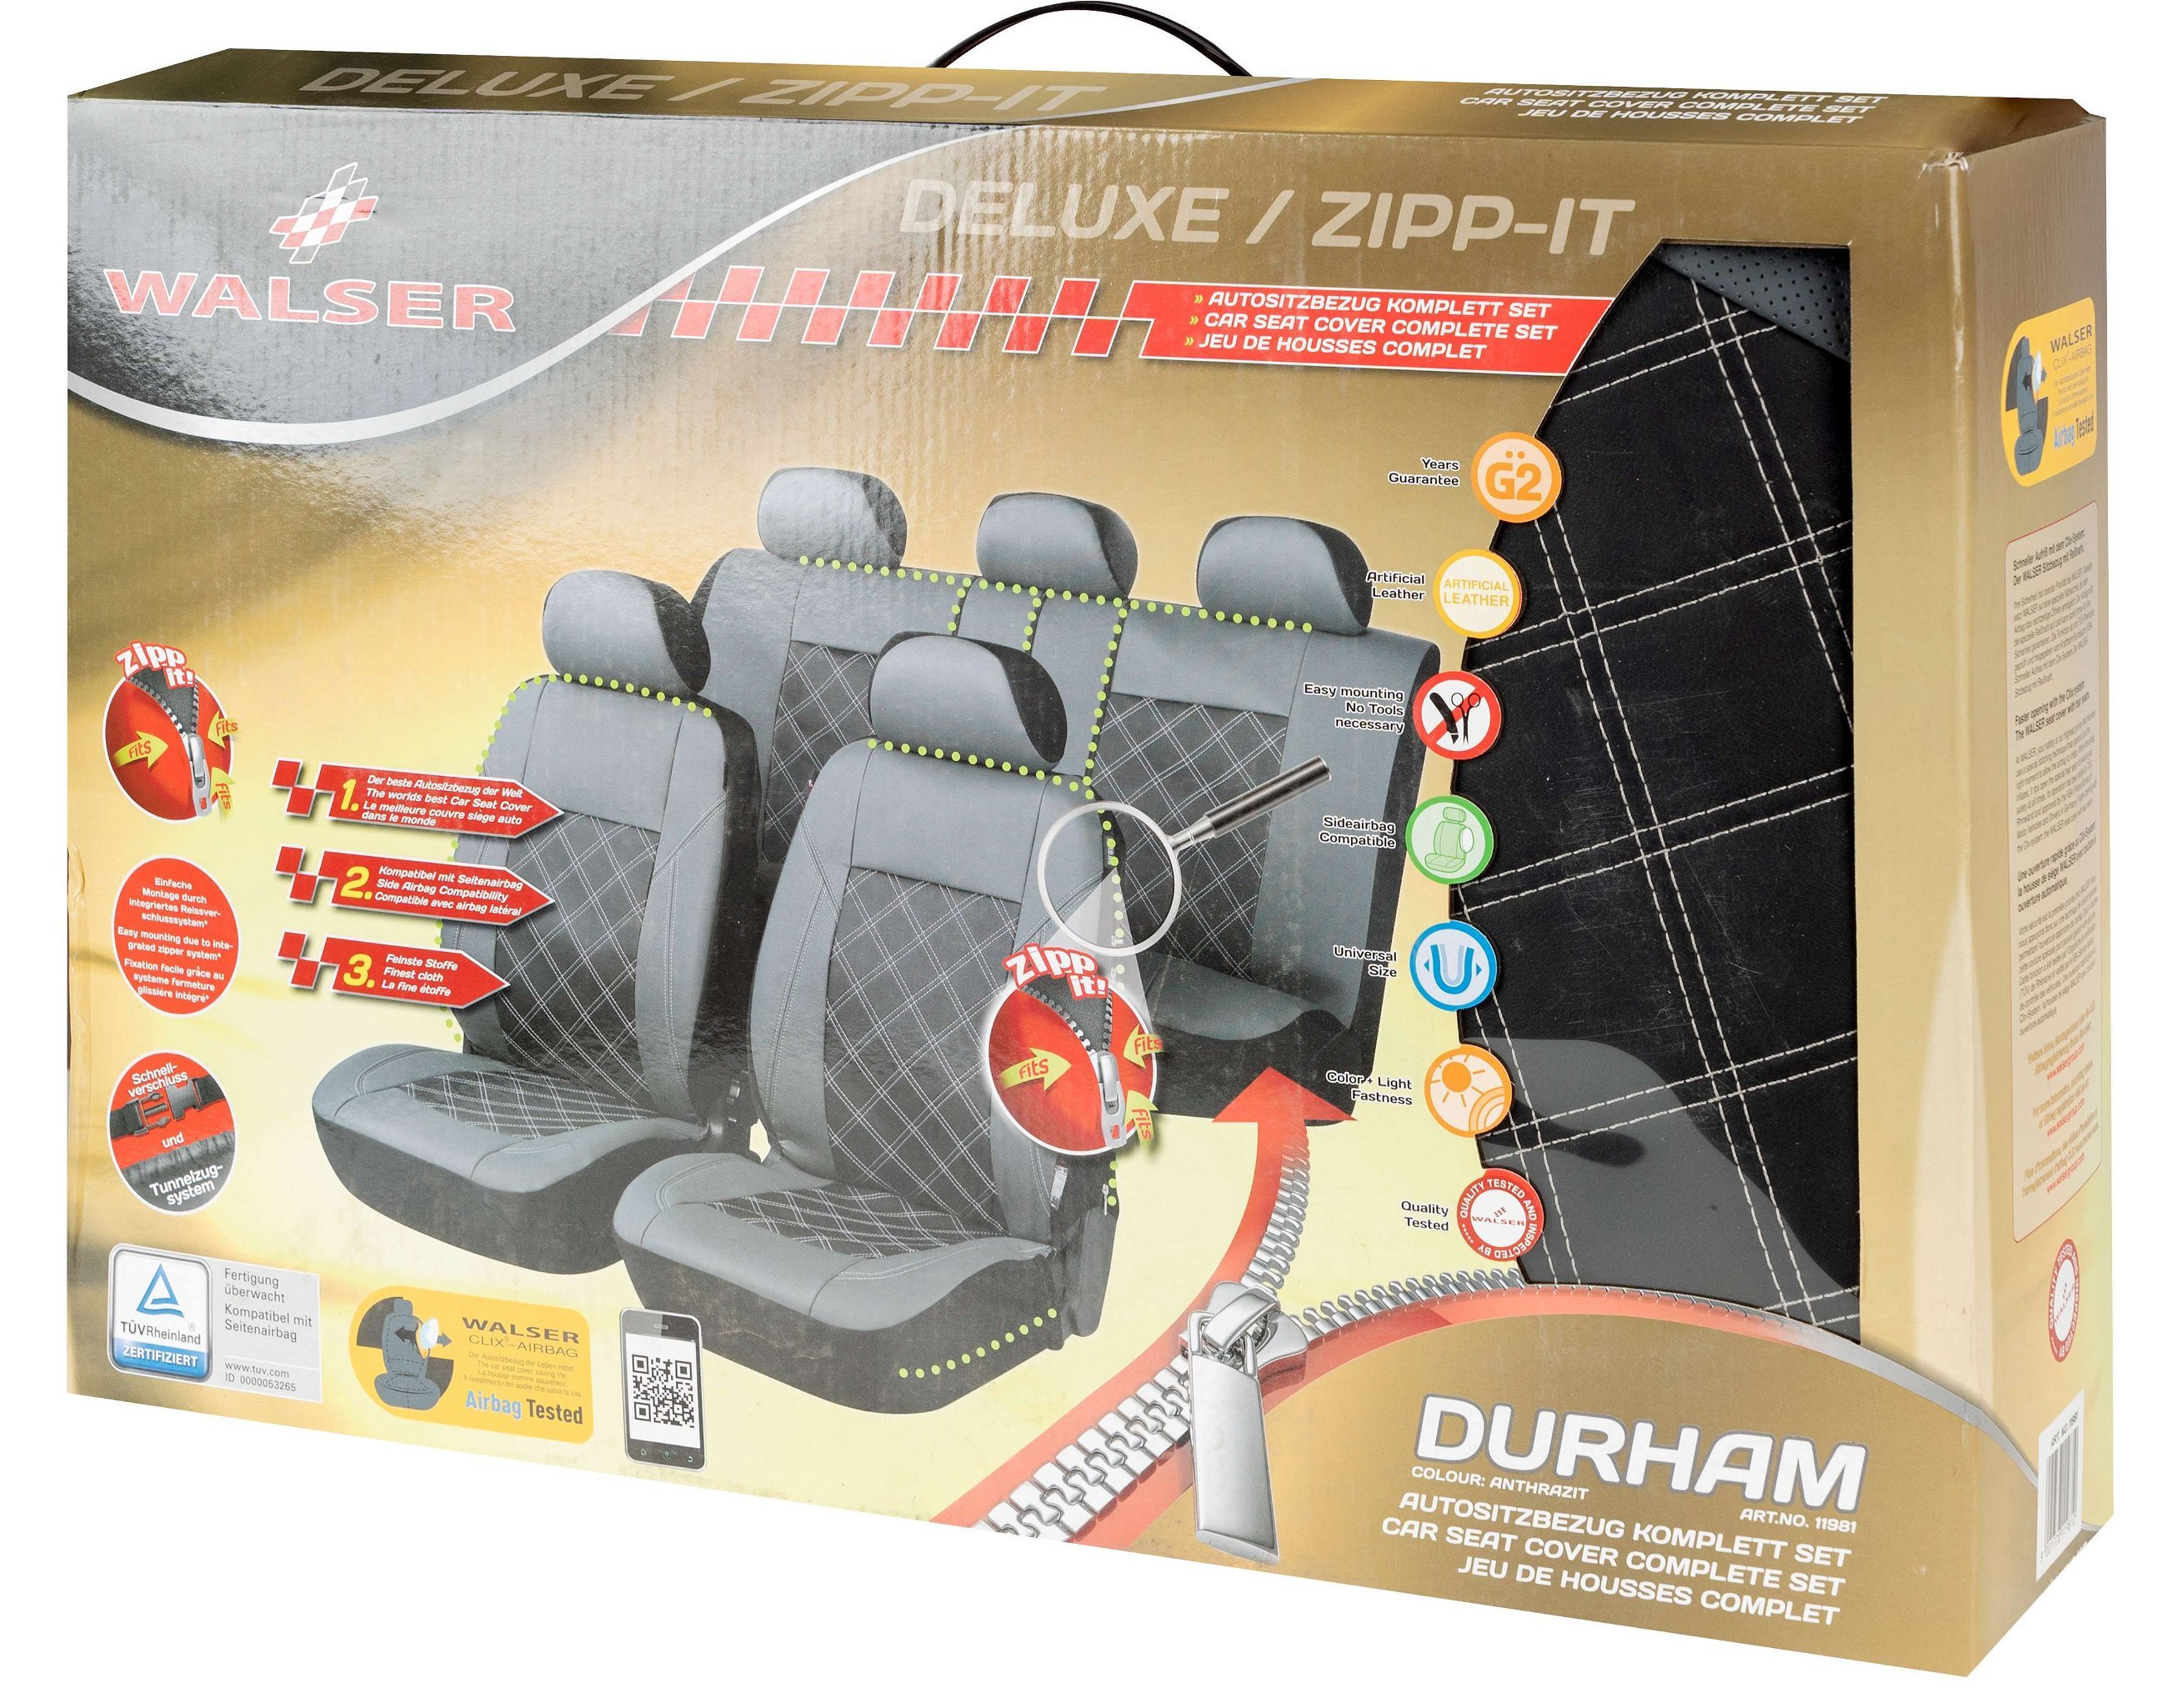 ZIPP IT Deluxe car Seat covers in Durham anthracite imitation leather with zipper system